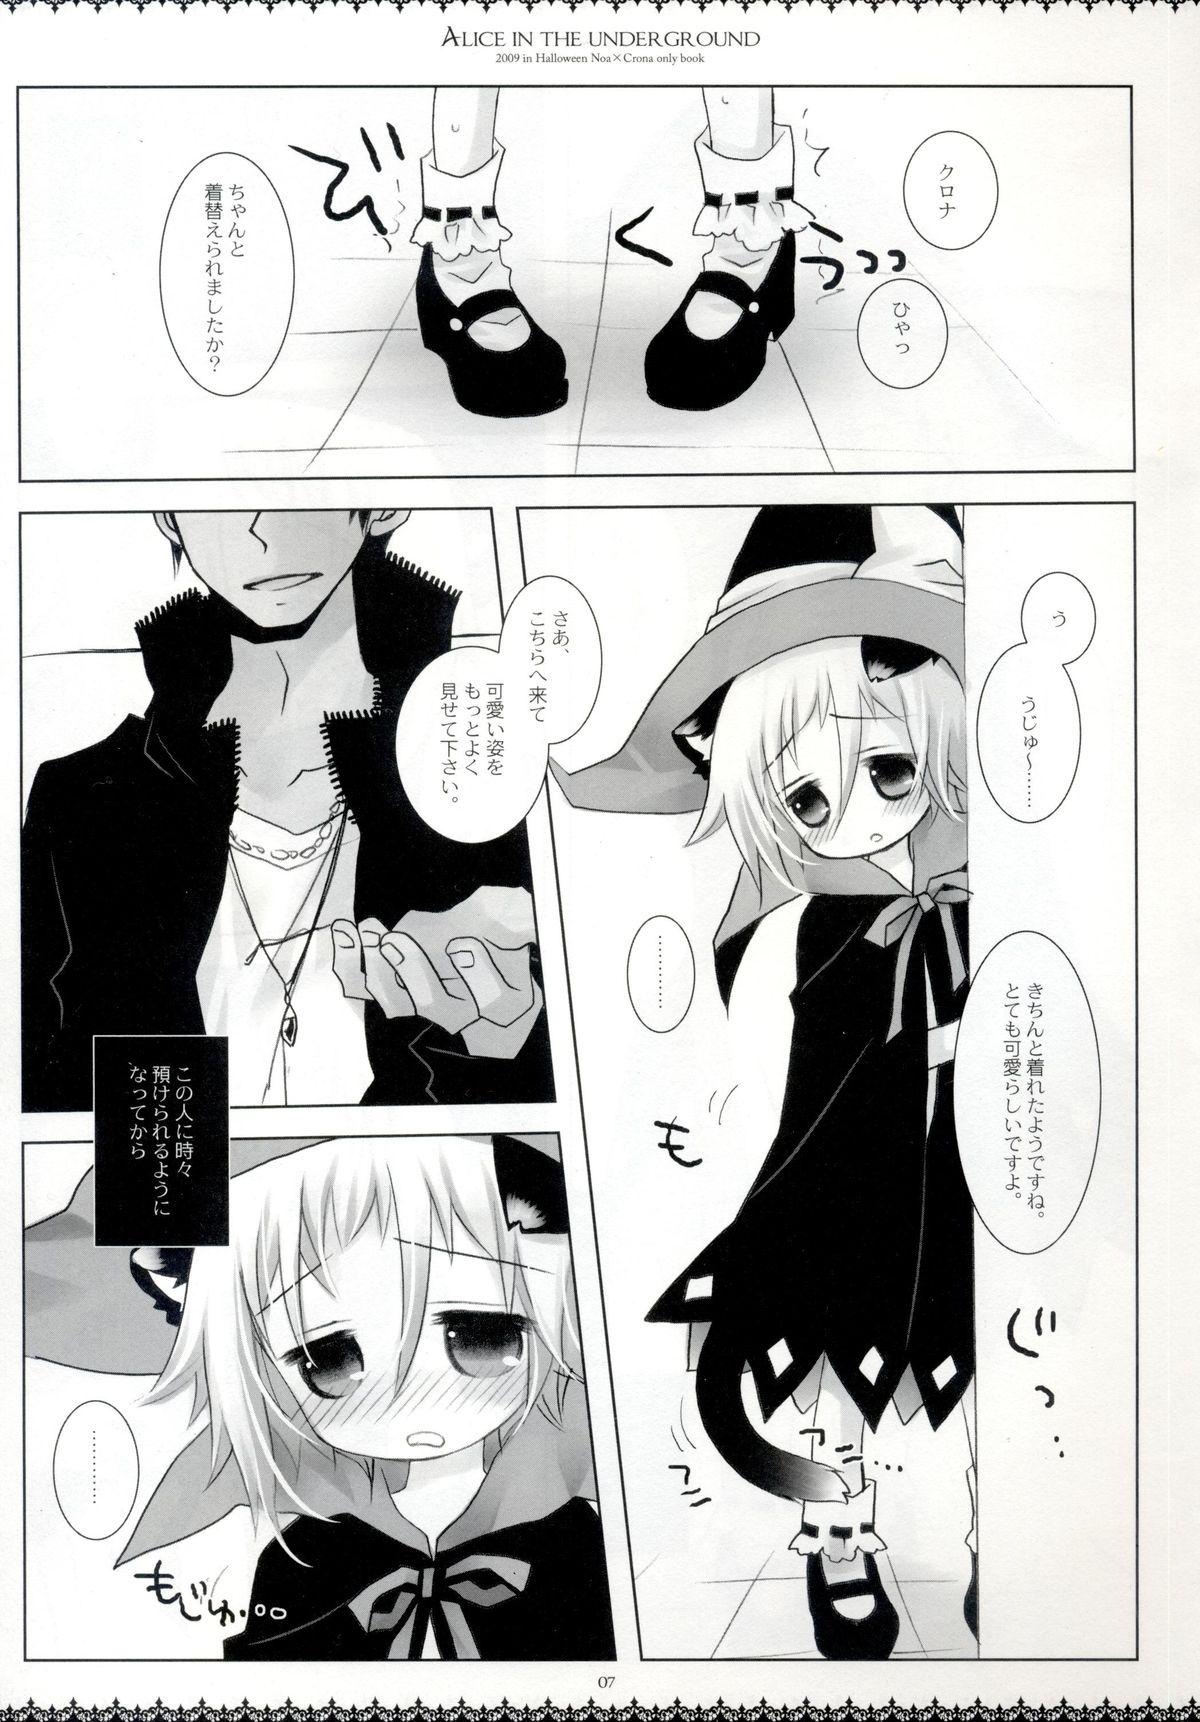 Bigtits Alice in the underground - Soul eater Pinoy - Page 6